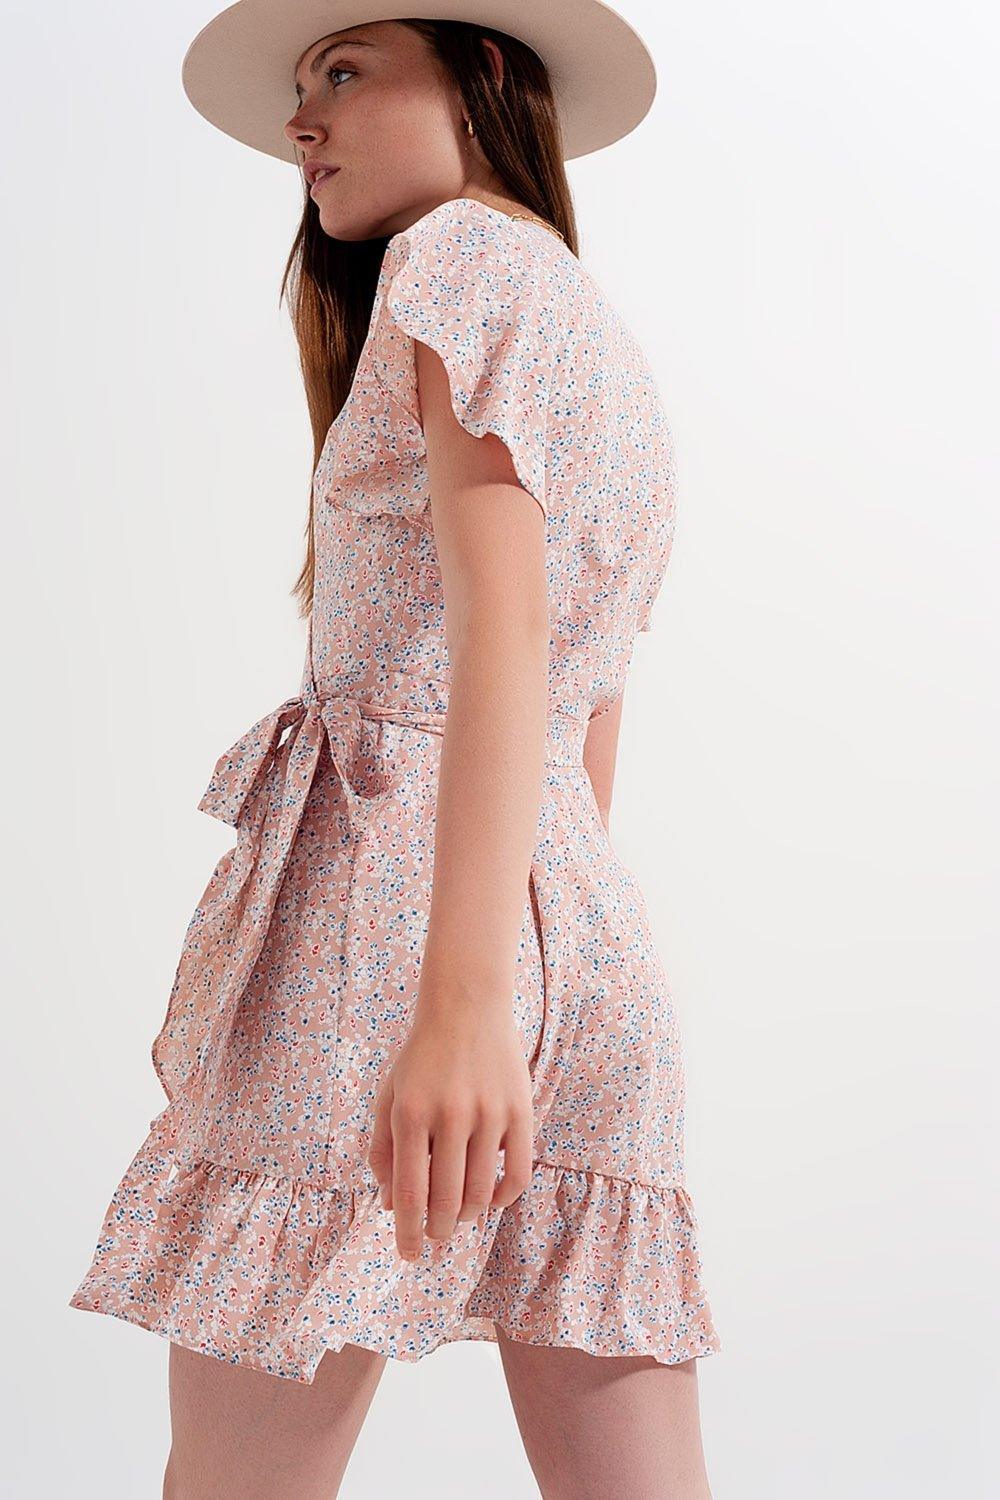 Mini Wrap Dress With Frill Hem in Pink Print from Q2 at Moosestrum.com